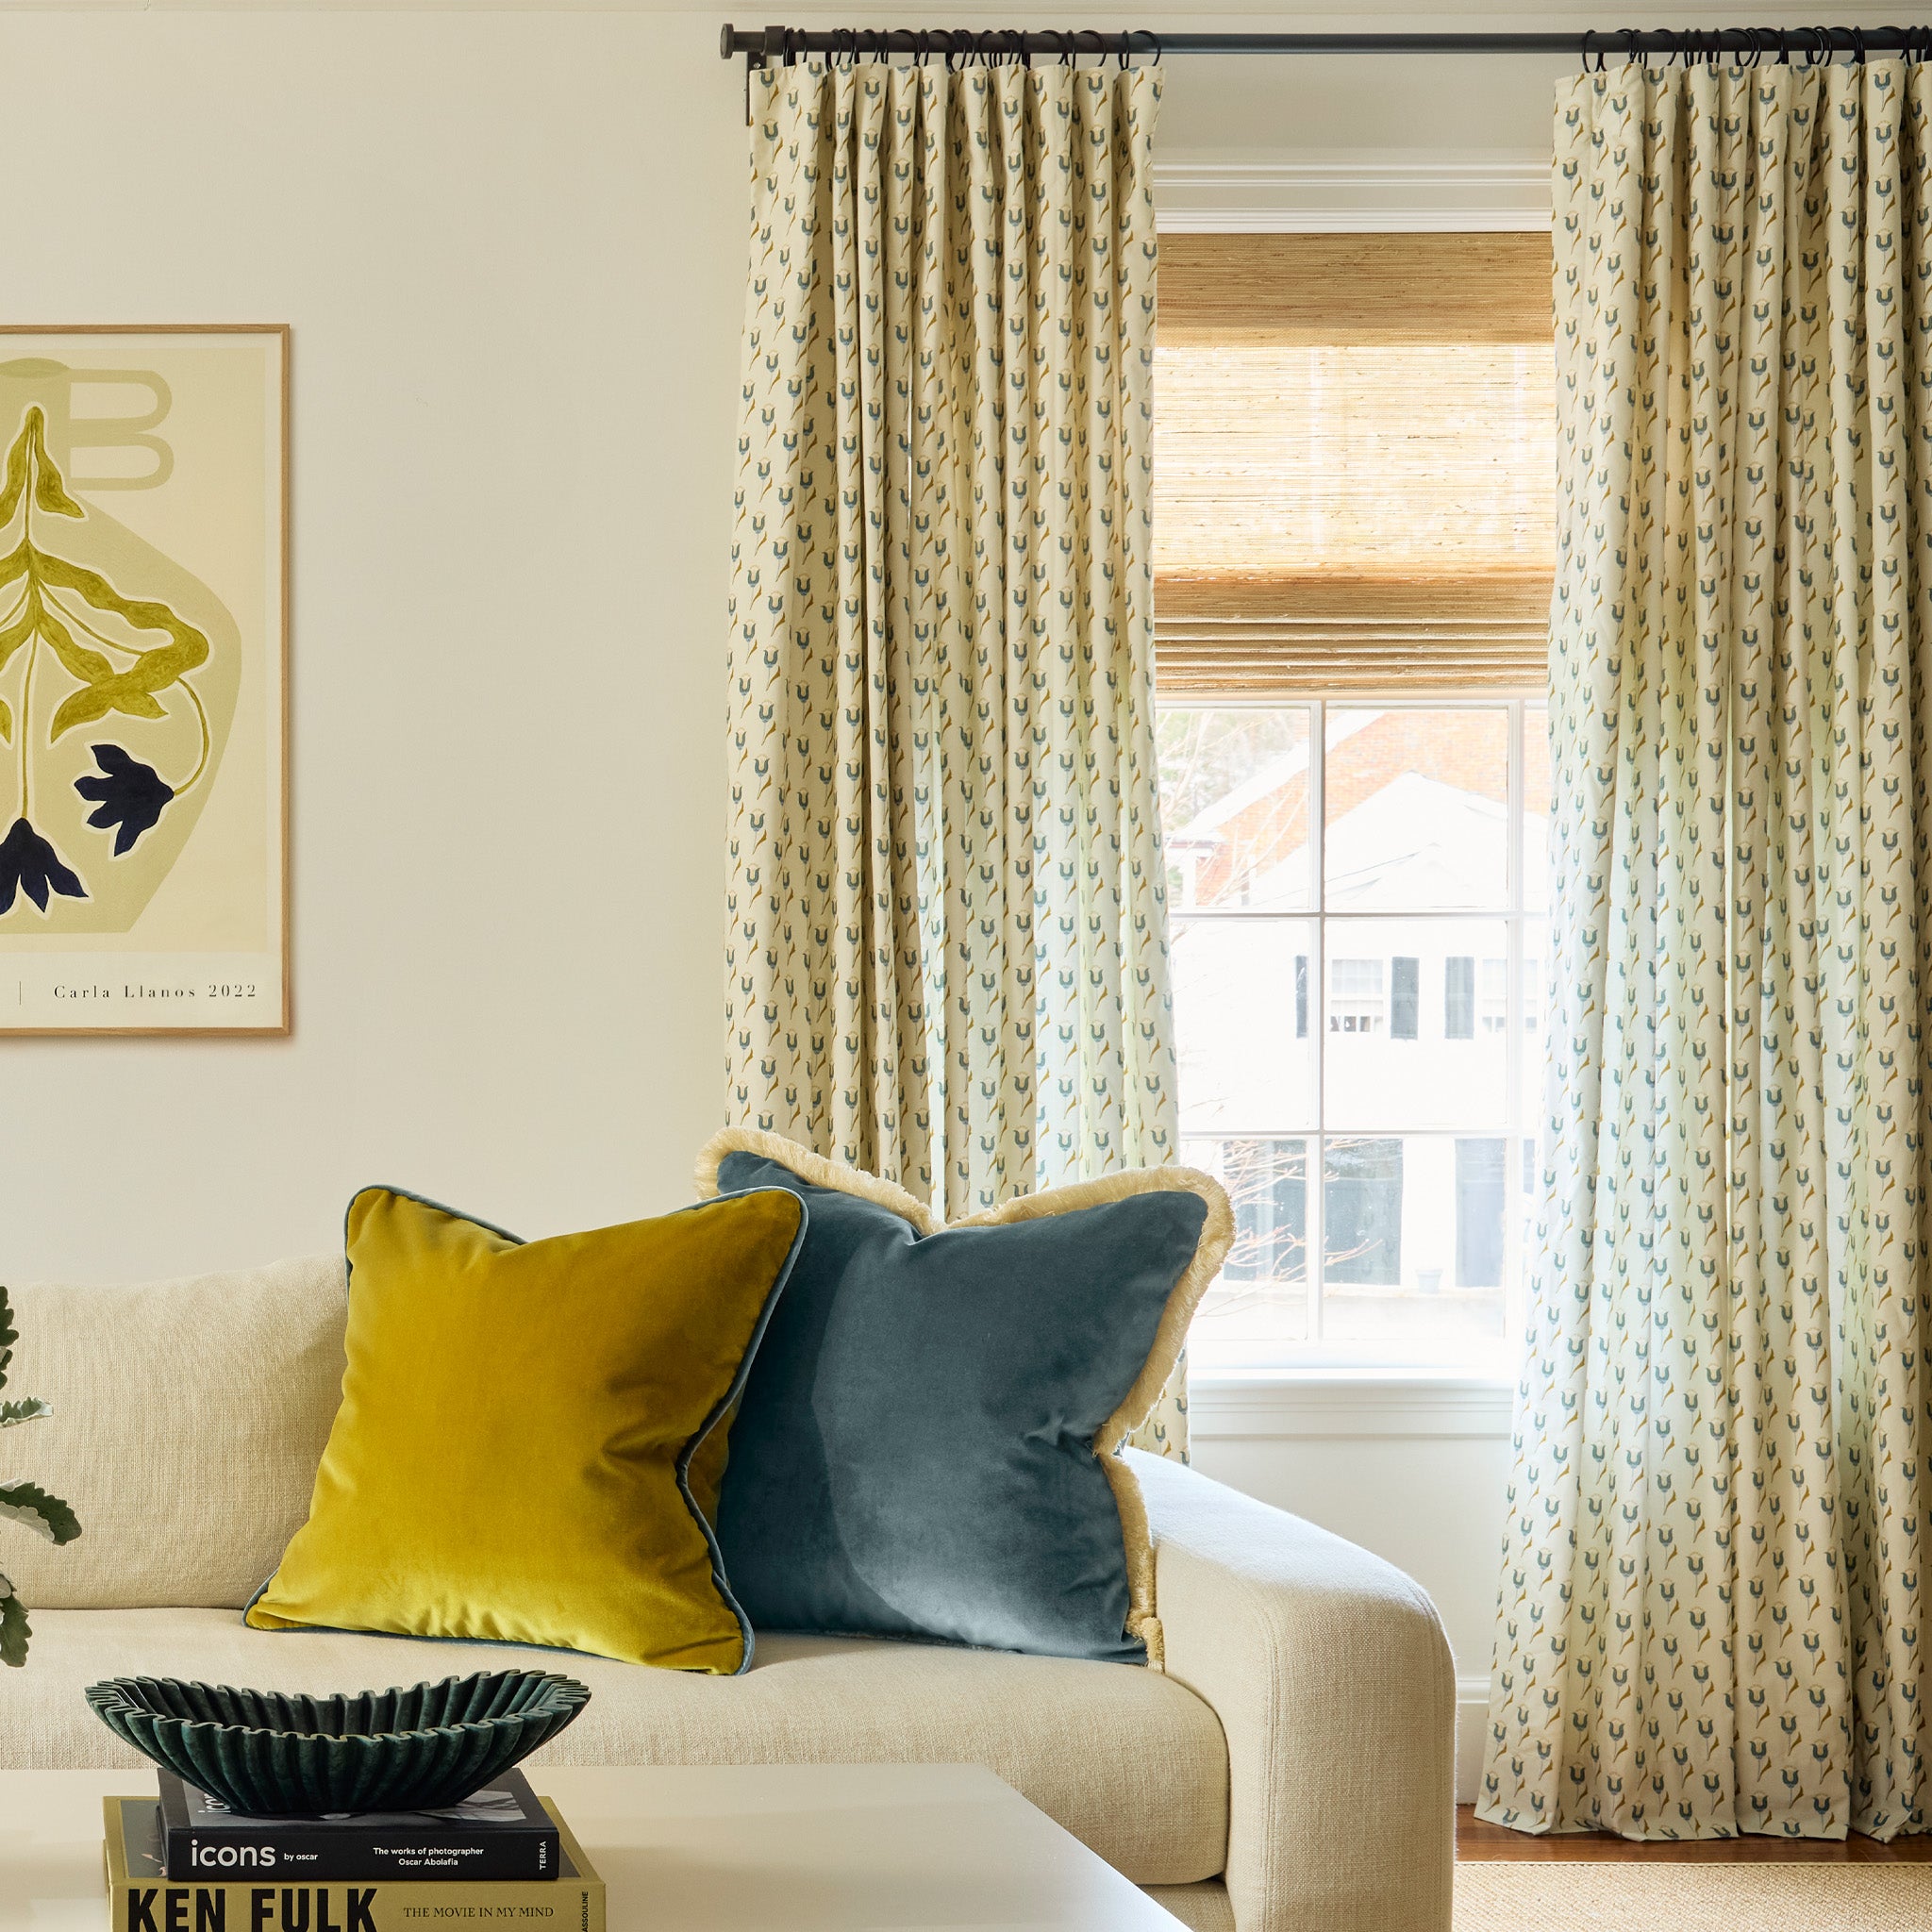 Abstract floral blue and green printed curtains on a metal rod in front of an illuminated window with a white couch with golden chartreuse velvet and peacock blue velvet pillows on it and a coffee table stacked with books